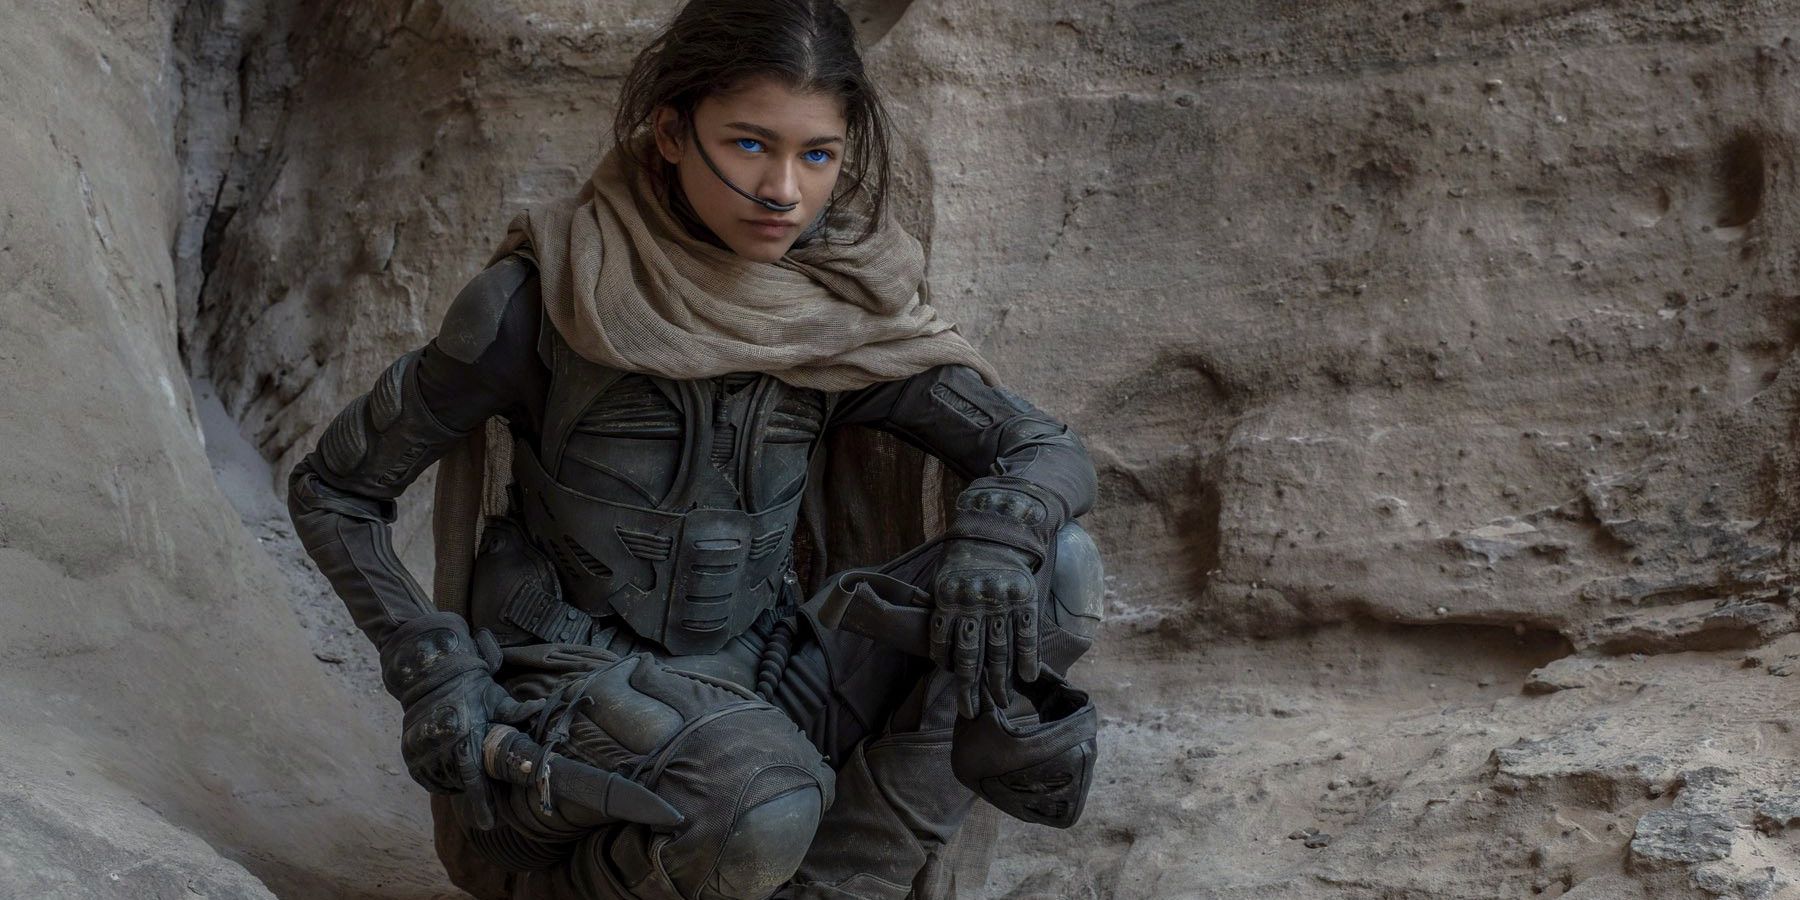 Zendaya will have a bigger role in Dune: Part 2.